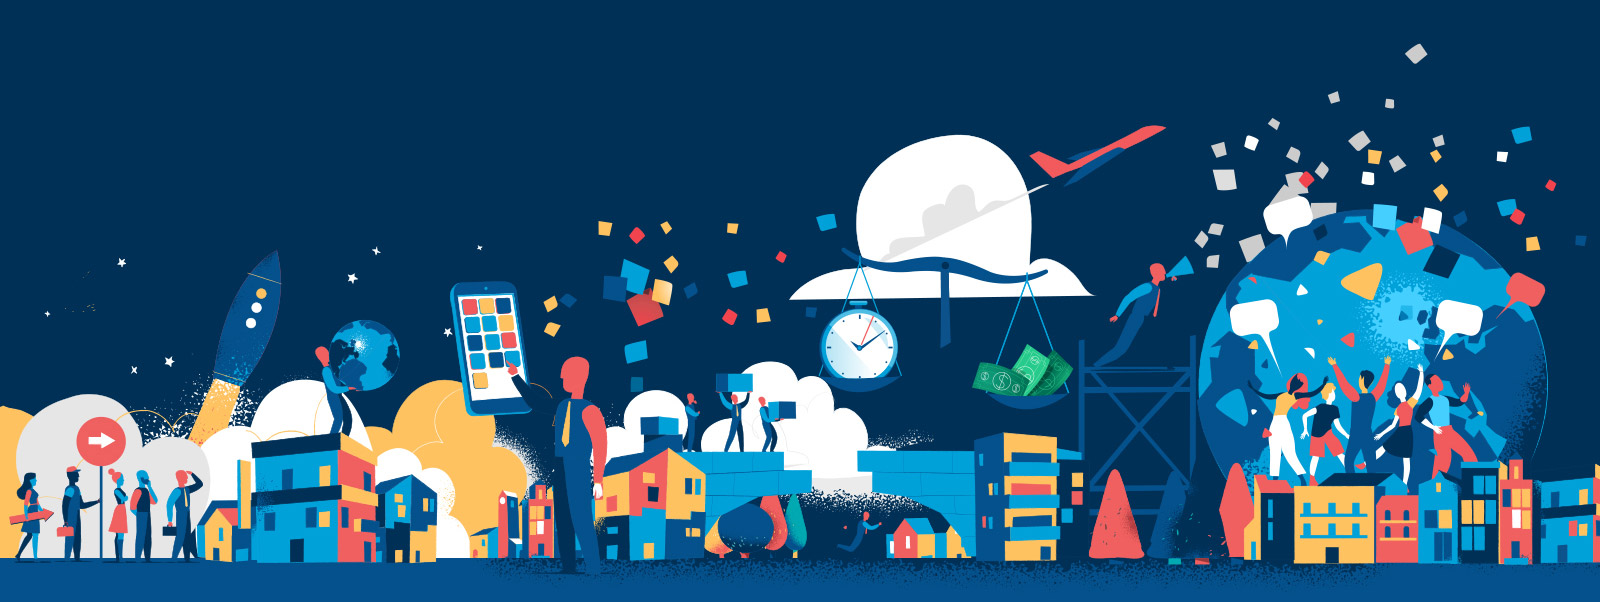 Vibrant graphic banner showing a stylized cityscape with various elements representing innovation and community. Features include a rocket launch, people using technology, a globe, and icons of financial growth and communication, all set against a dark blue background.